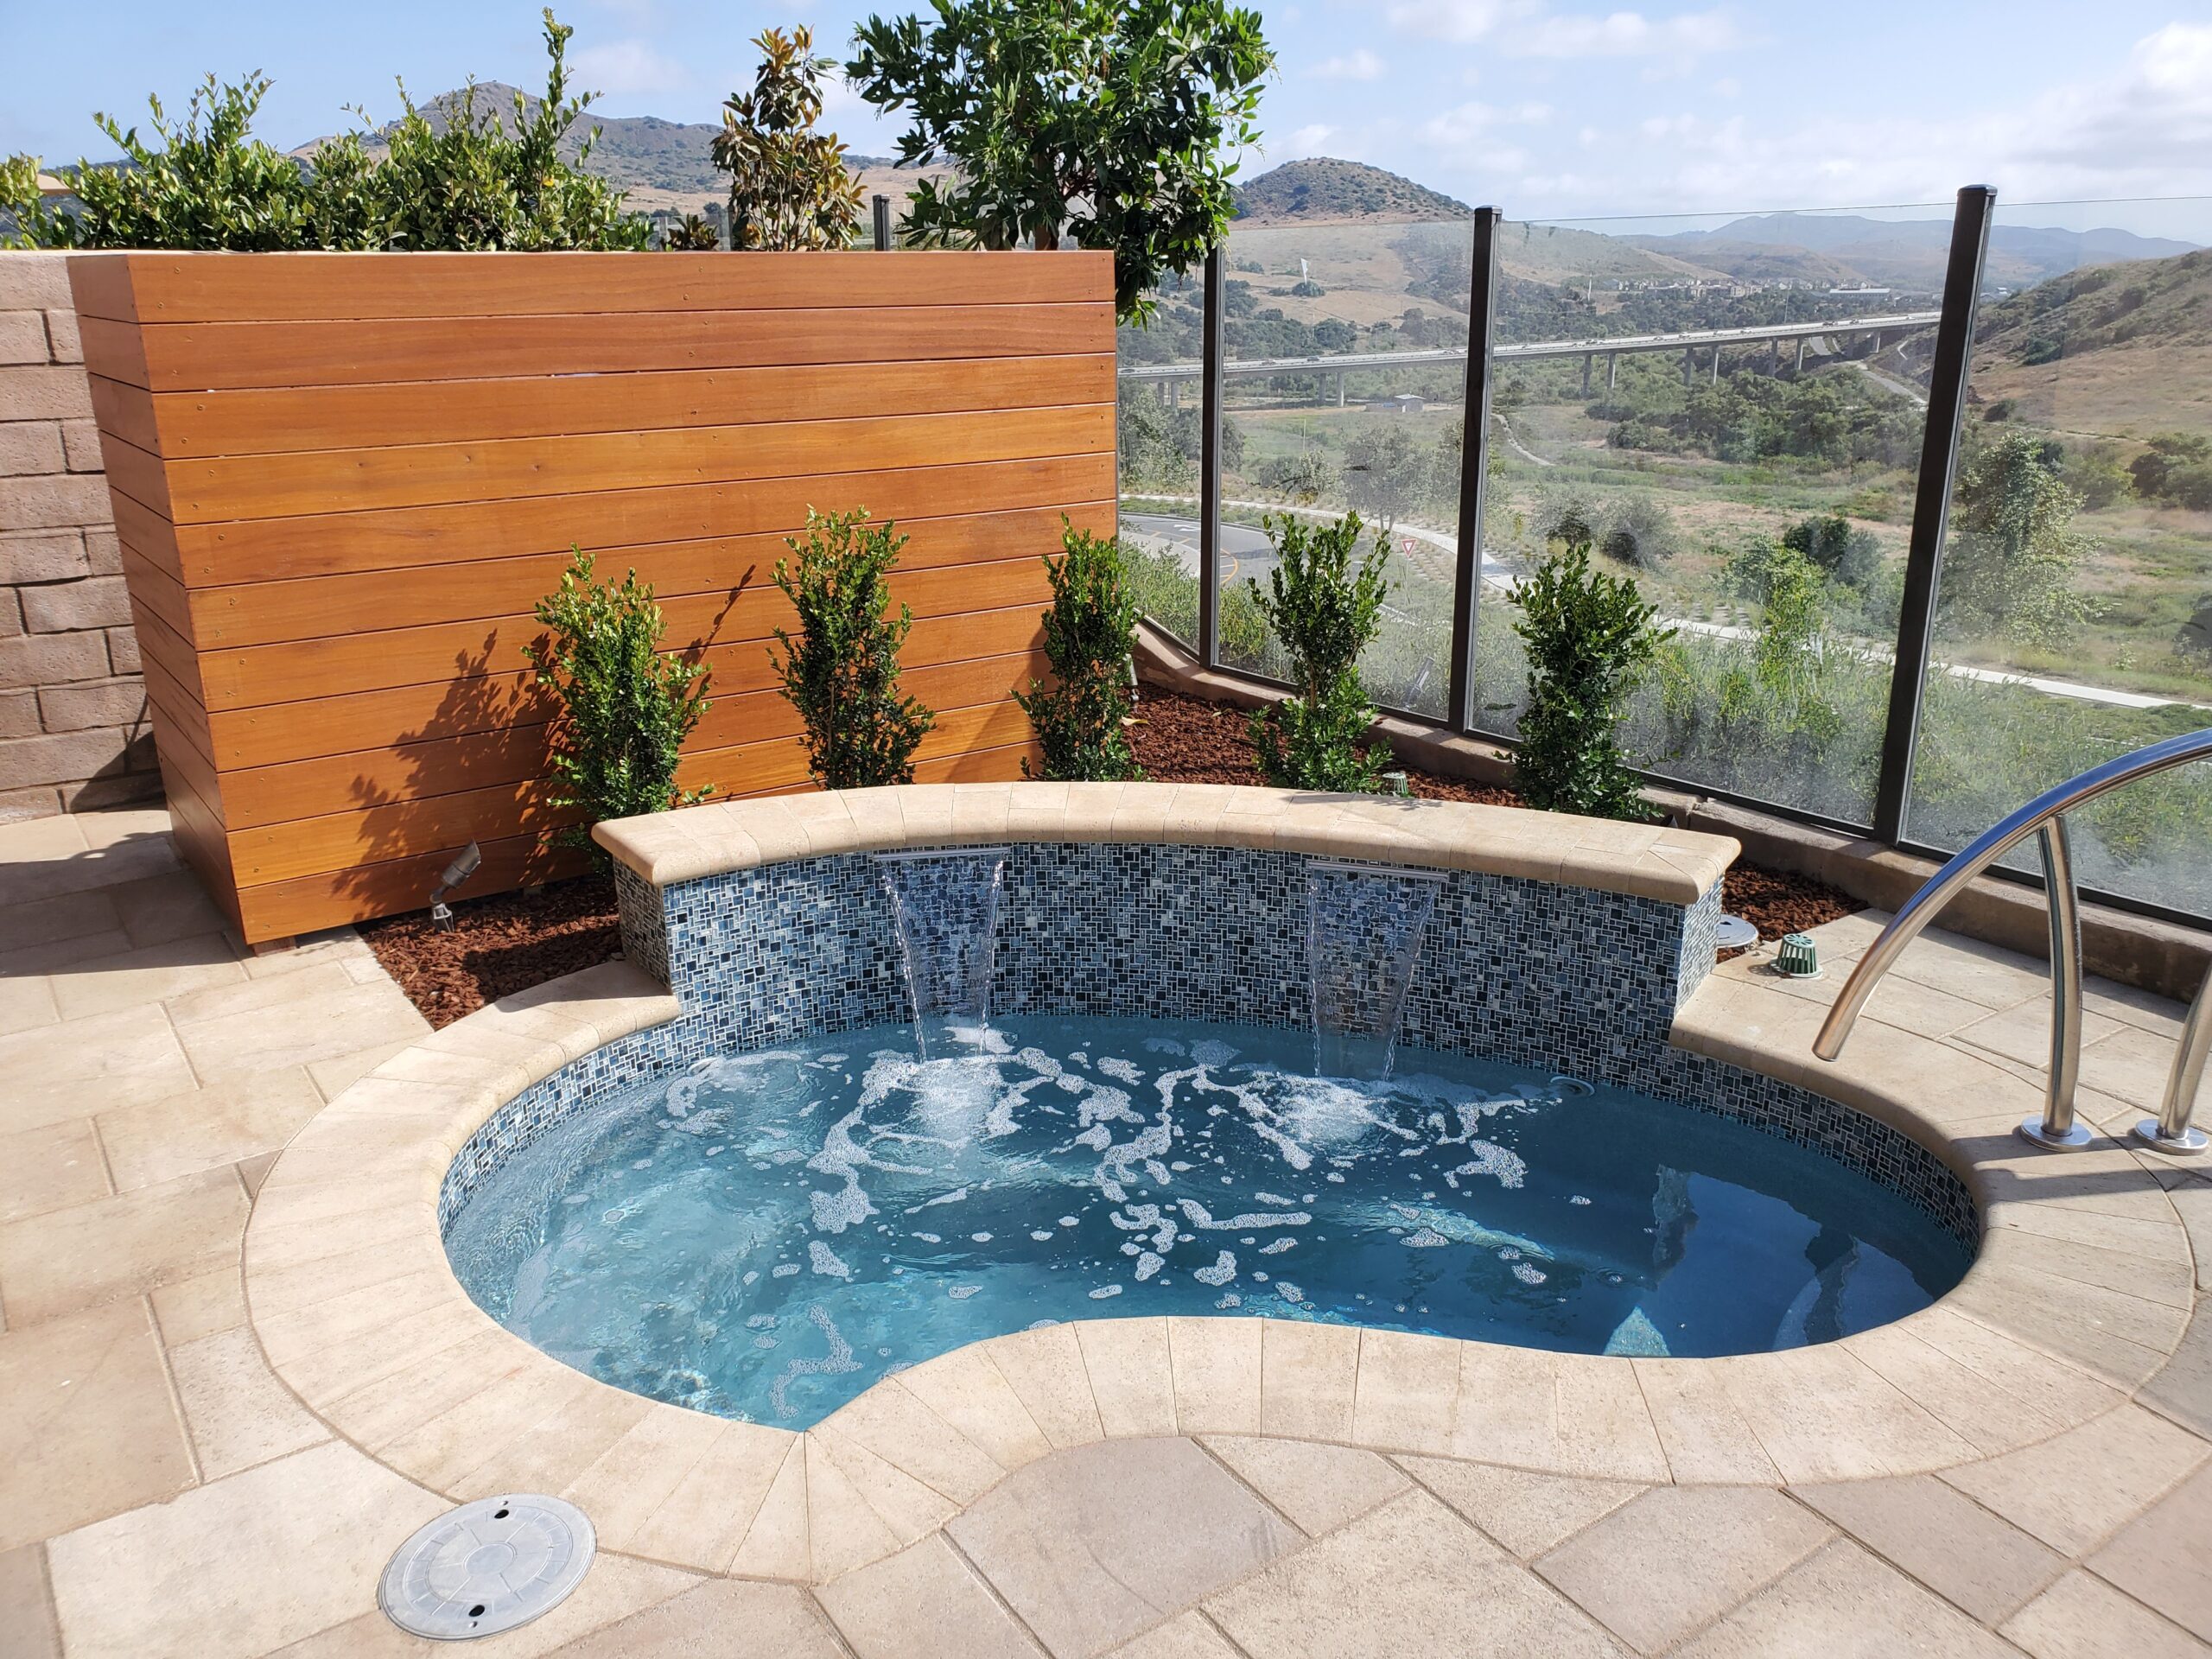 Fiberglass in-ground Spas built to last by VIP swimming pools in Orange County